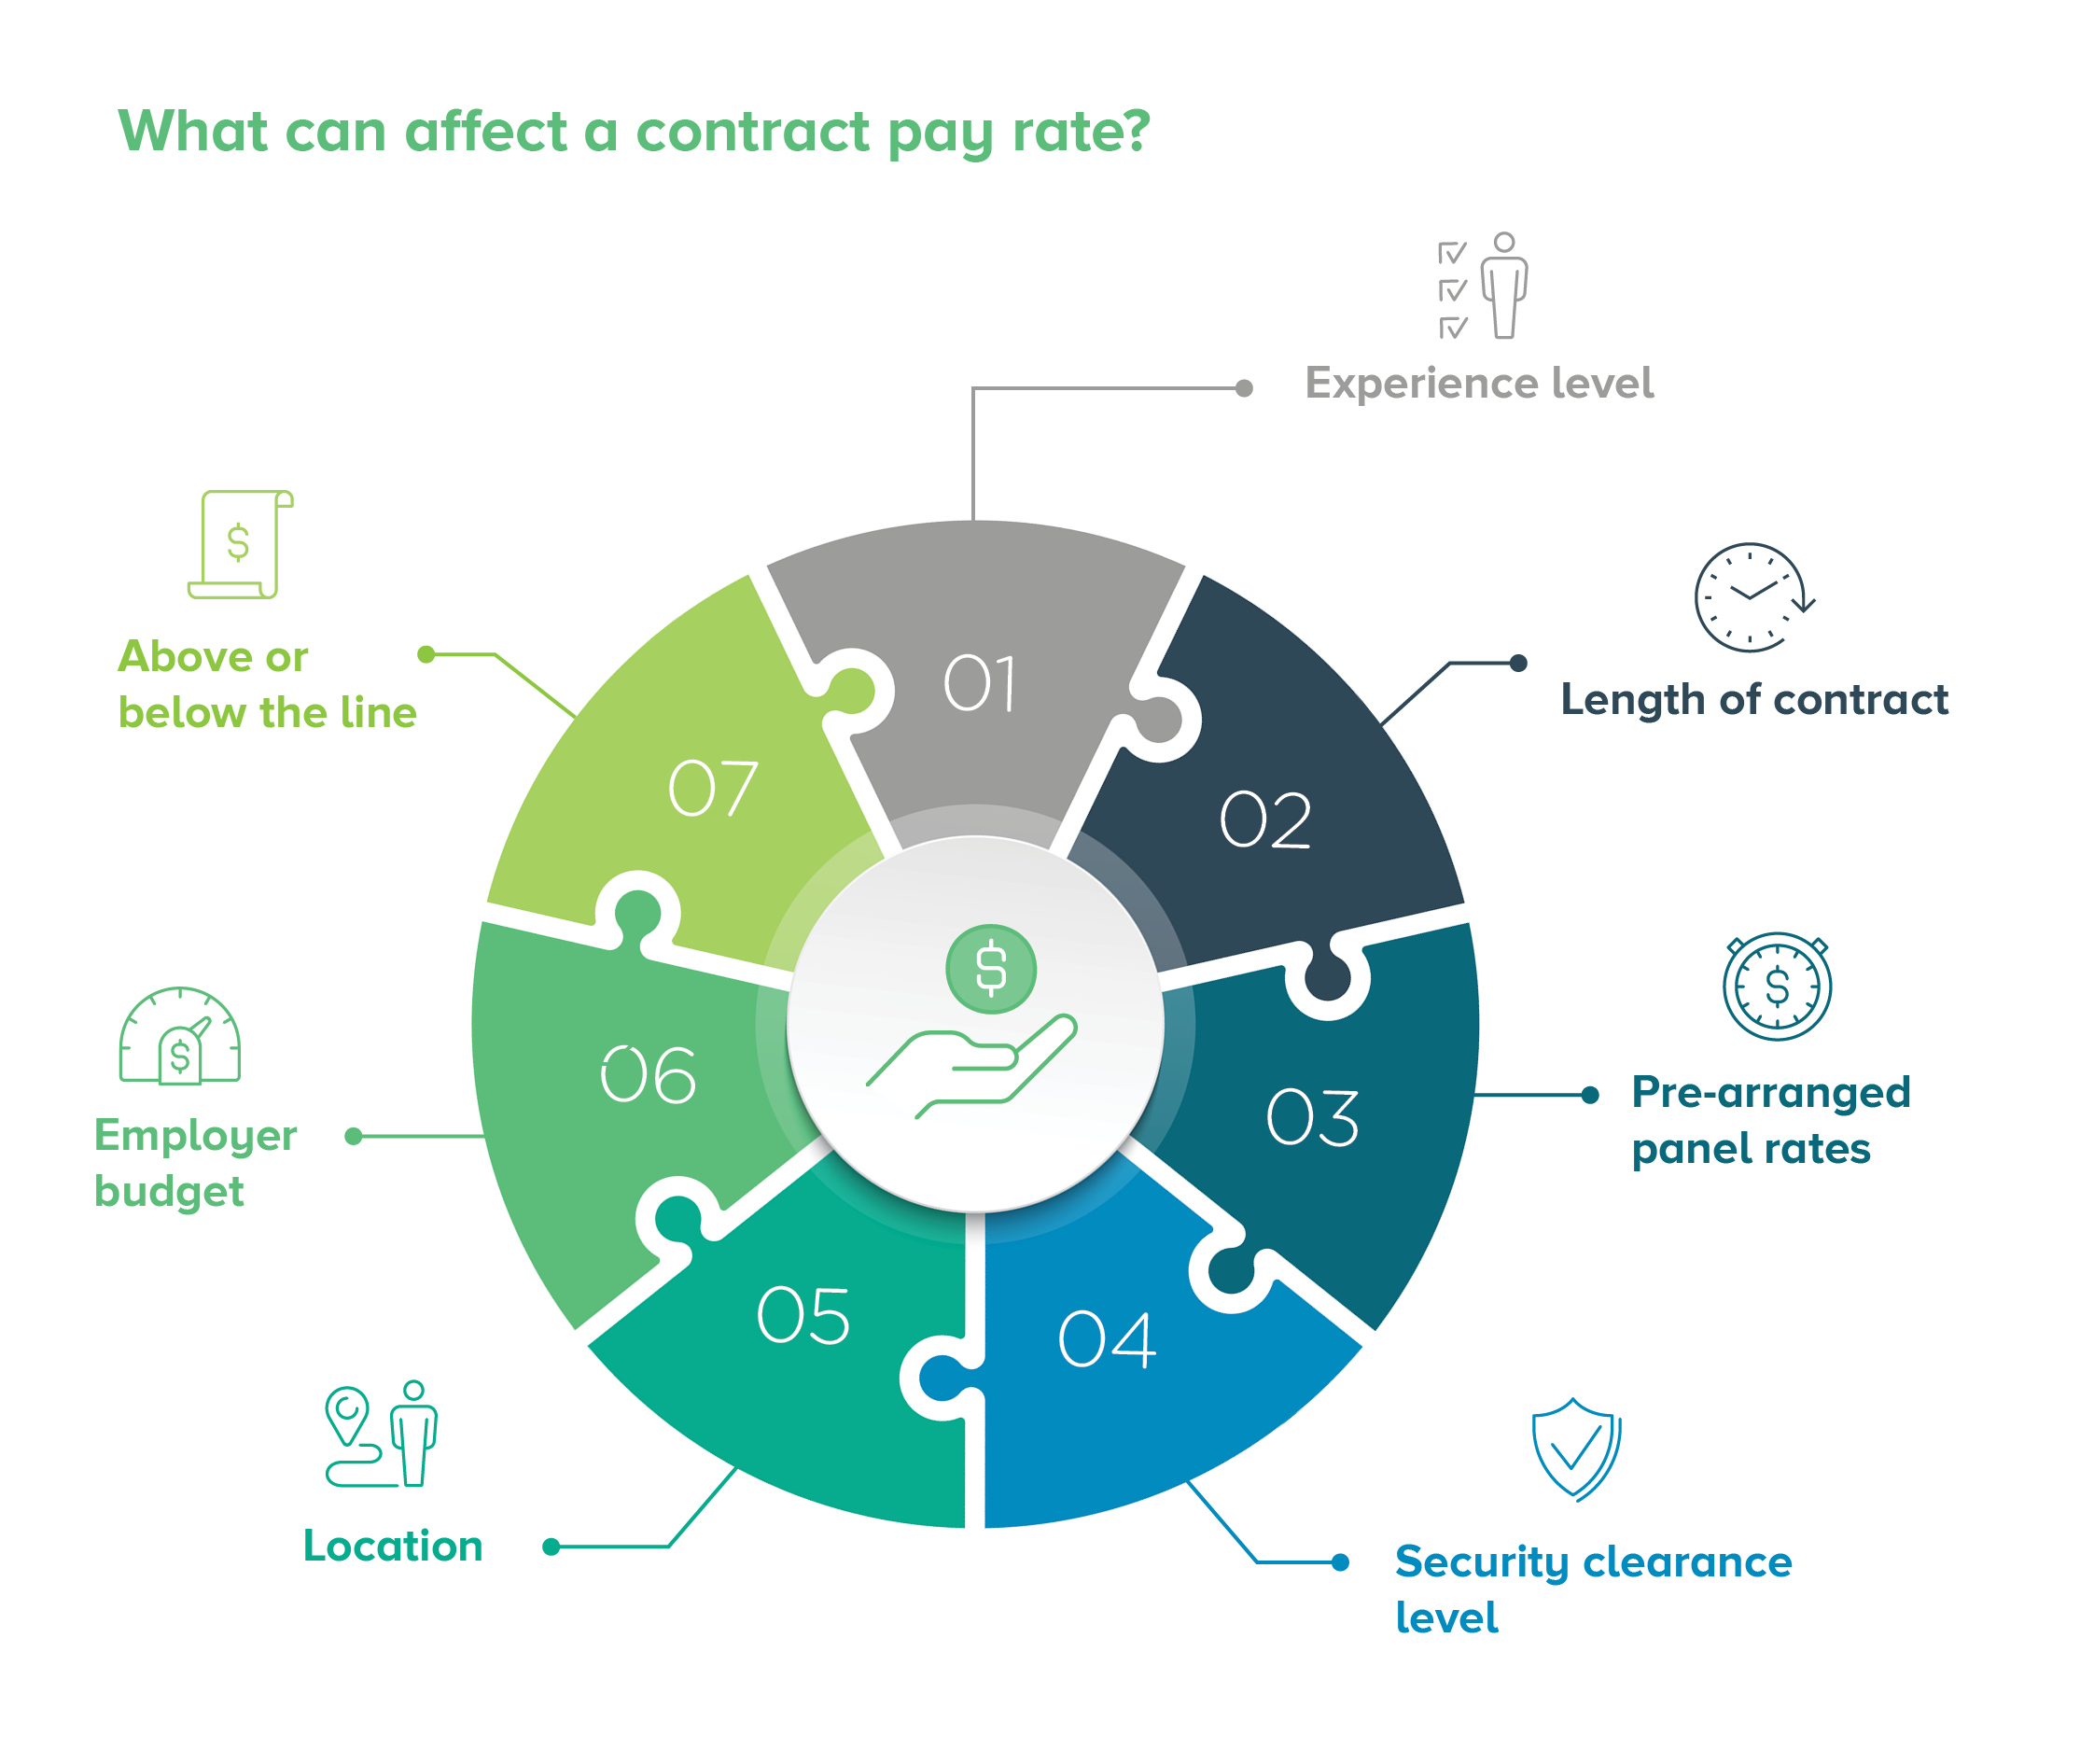 Image showing the 7 factors that affect a contract pay rate